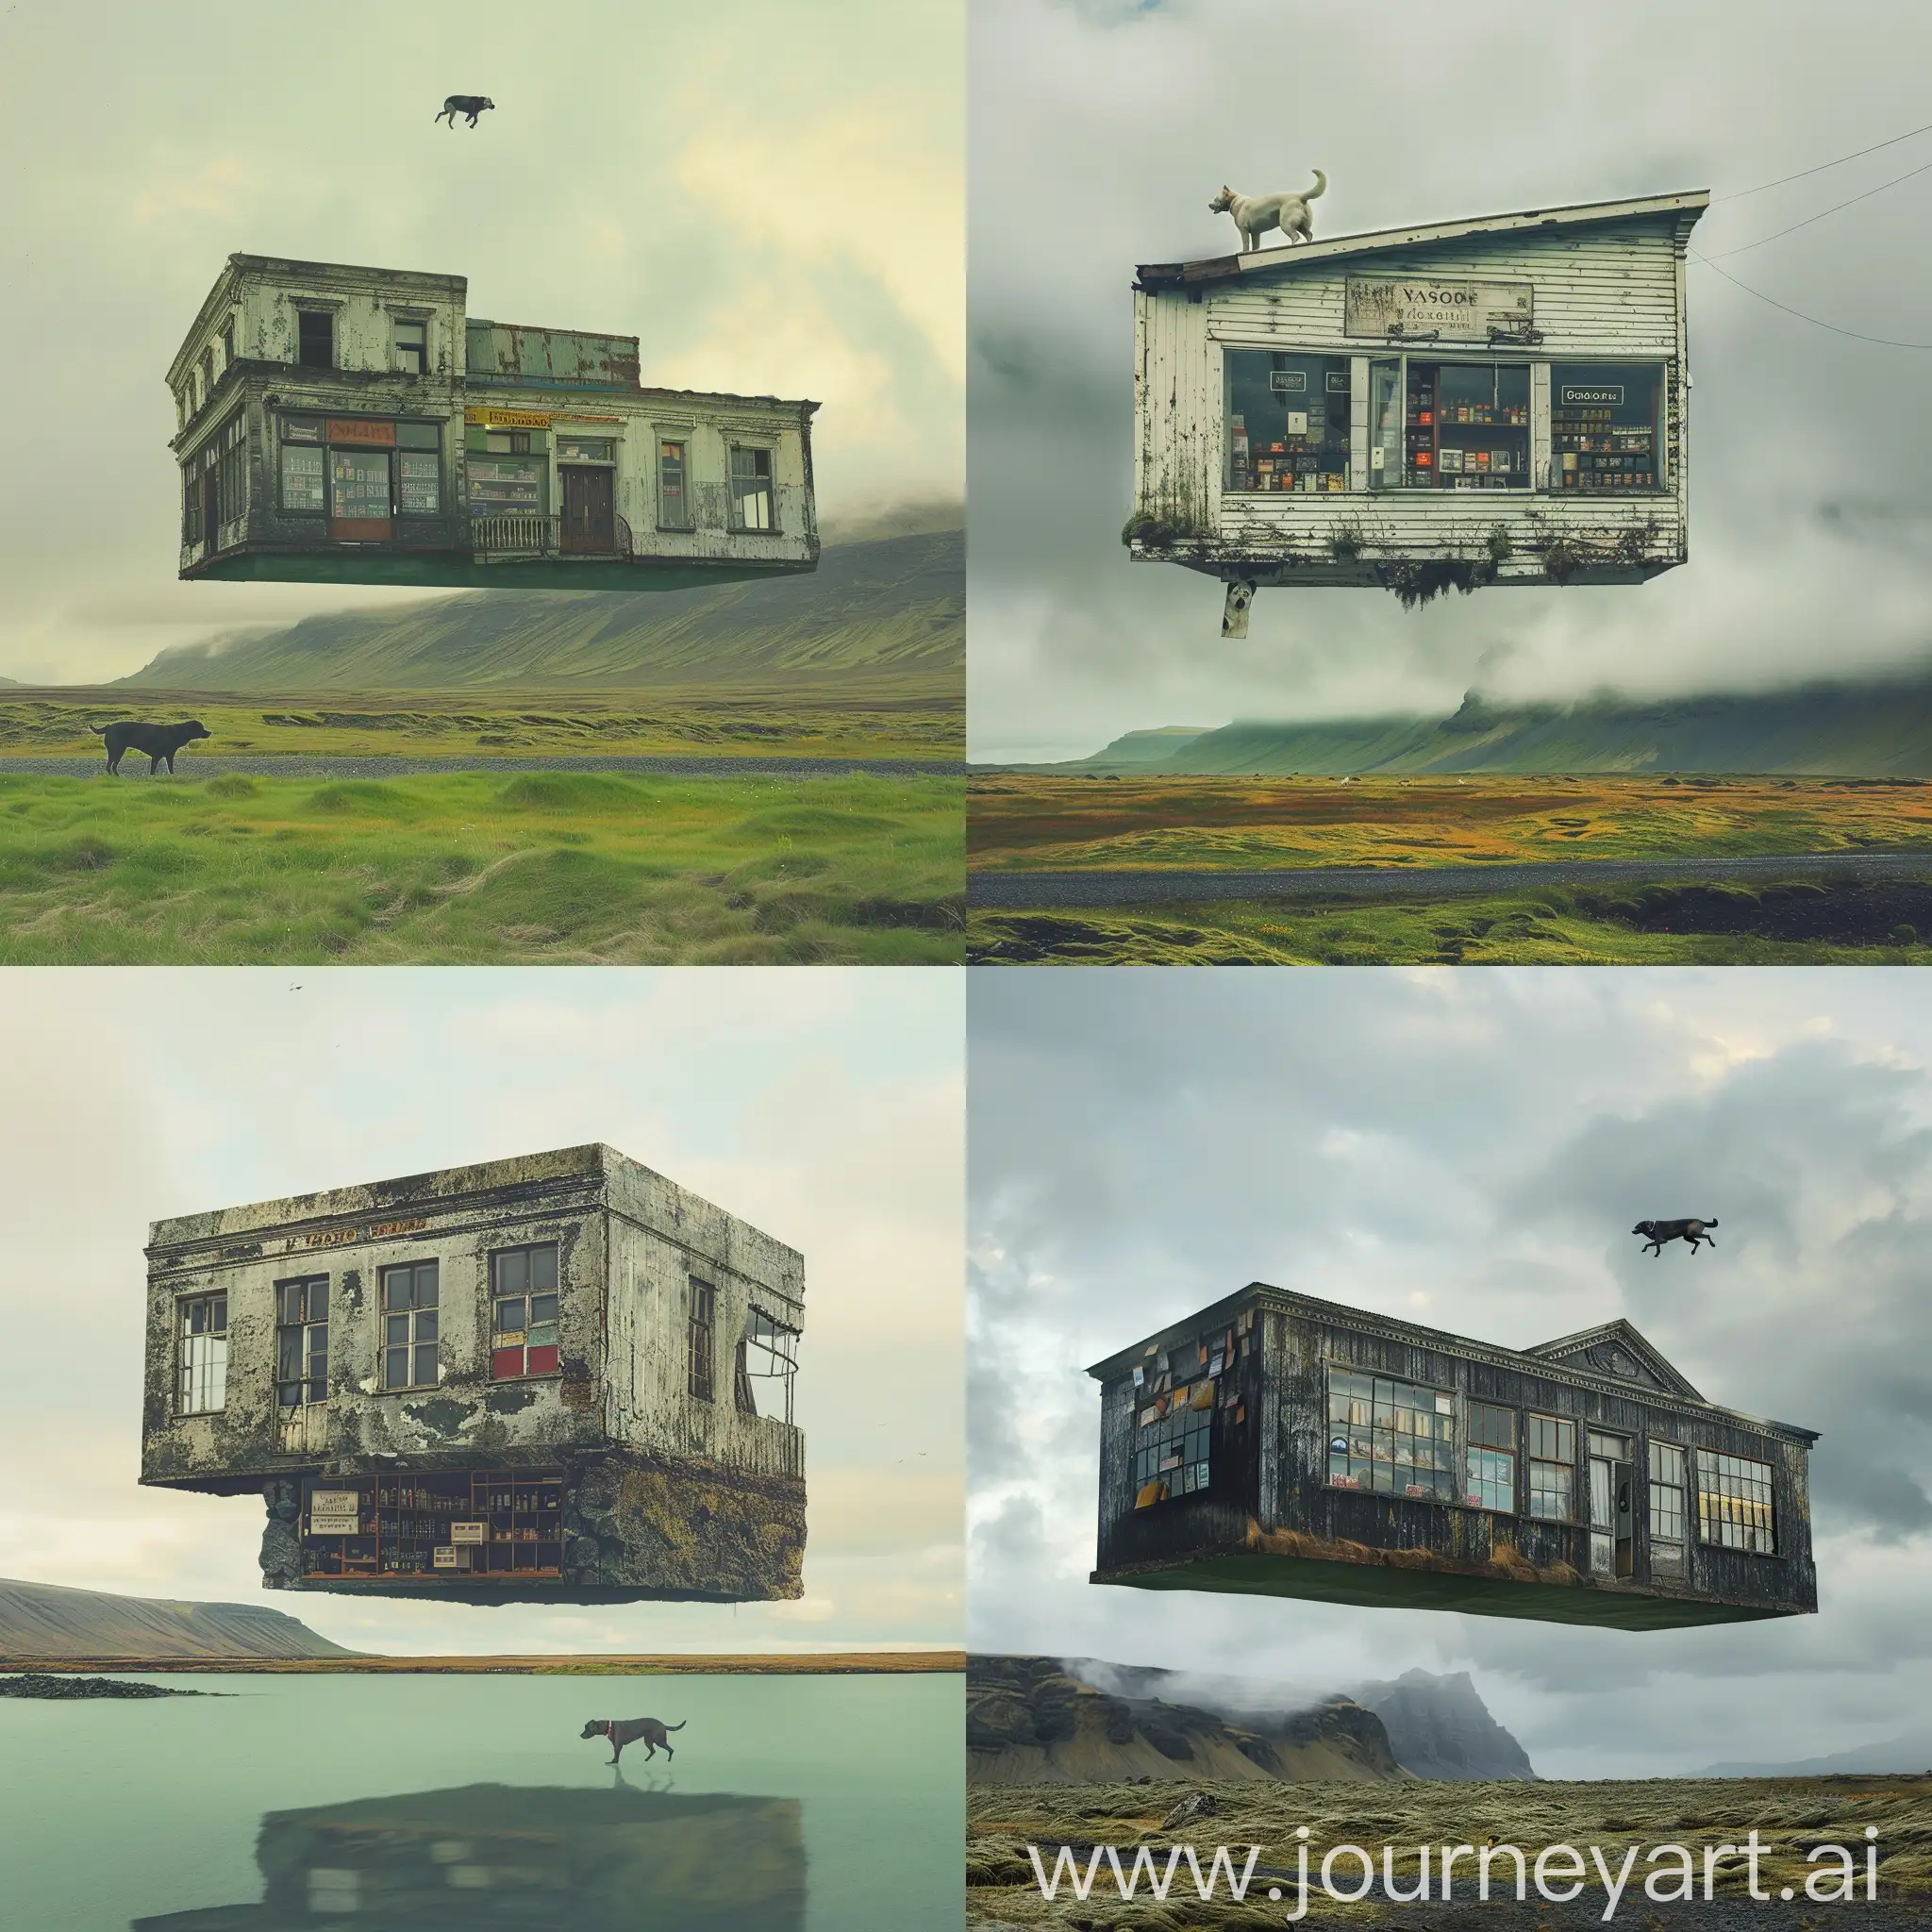 Huge old weird shop floating above green iceland surface, dog, mystery